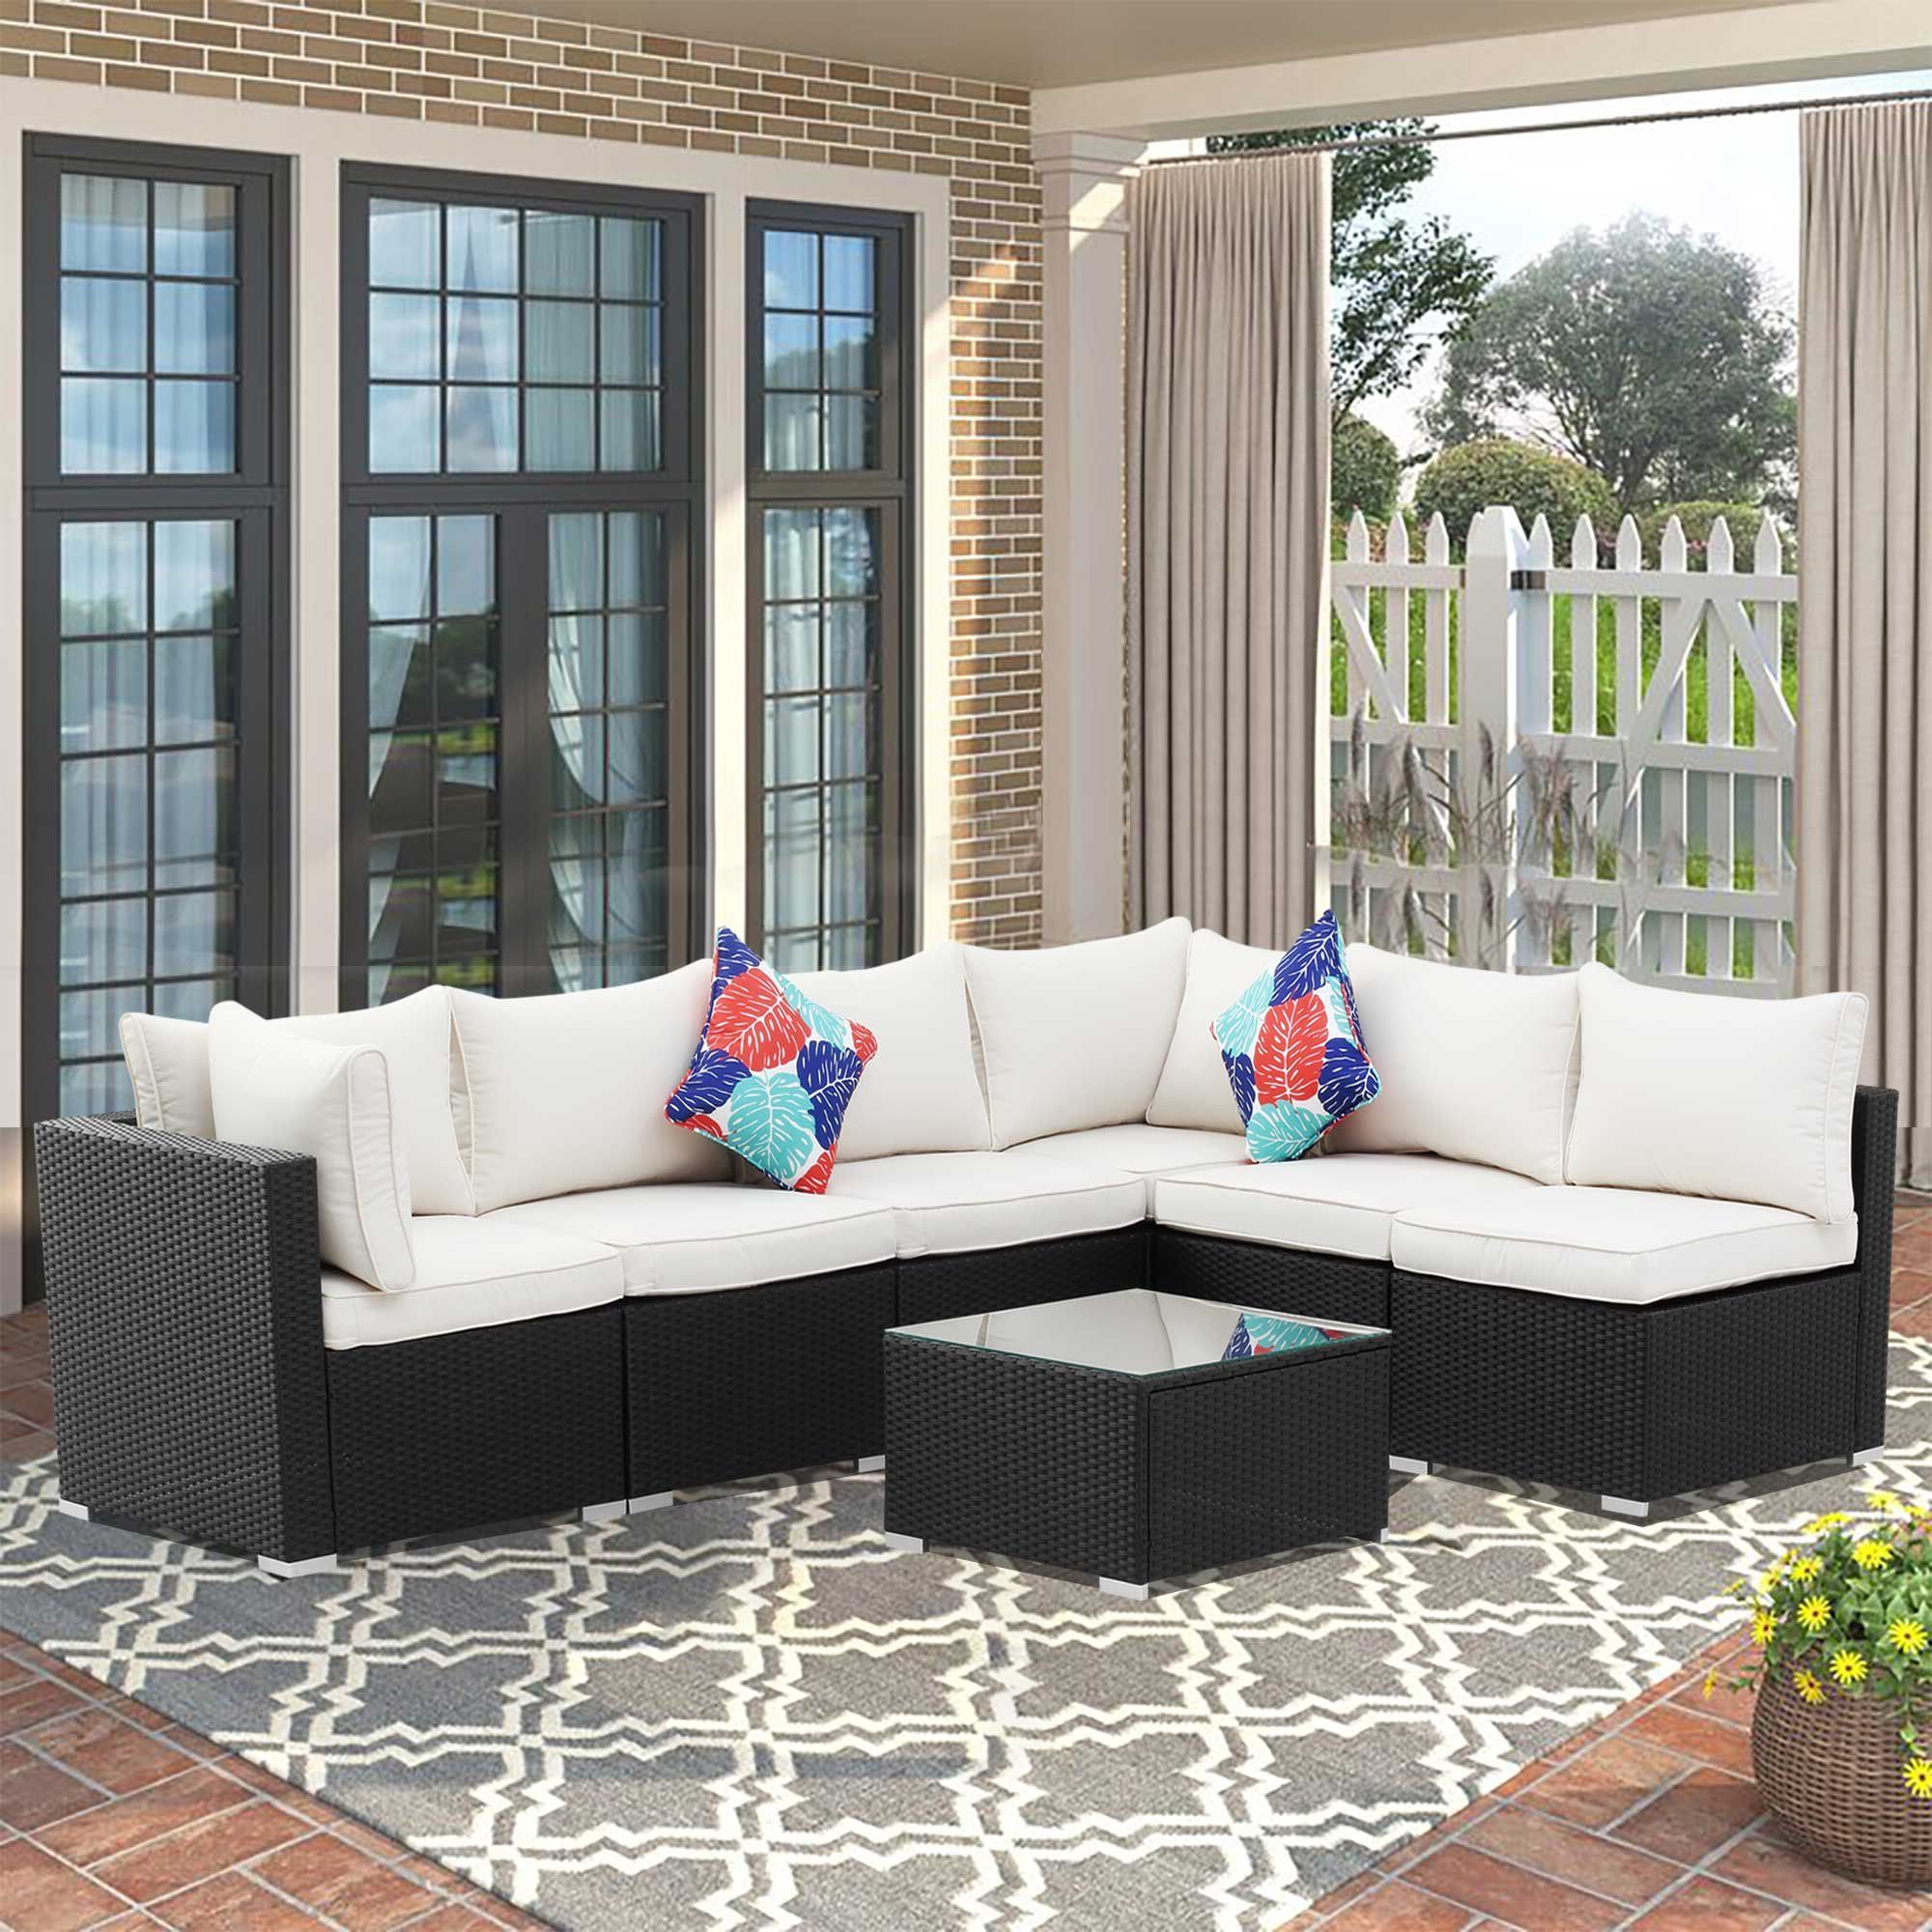 Most Current 7 Piece Rattan Sectional Sofa Set Inside Latitude Run® 7 Piece Rattan Sectional Seating Group With Cushions (View 15 of 15)